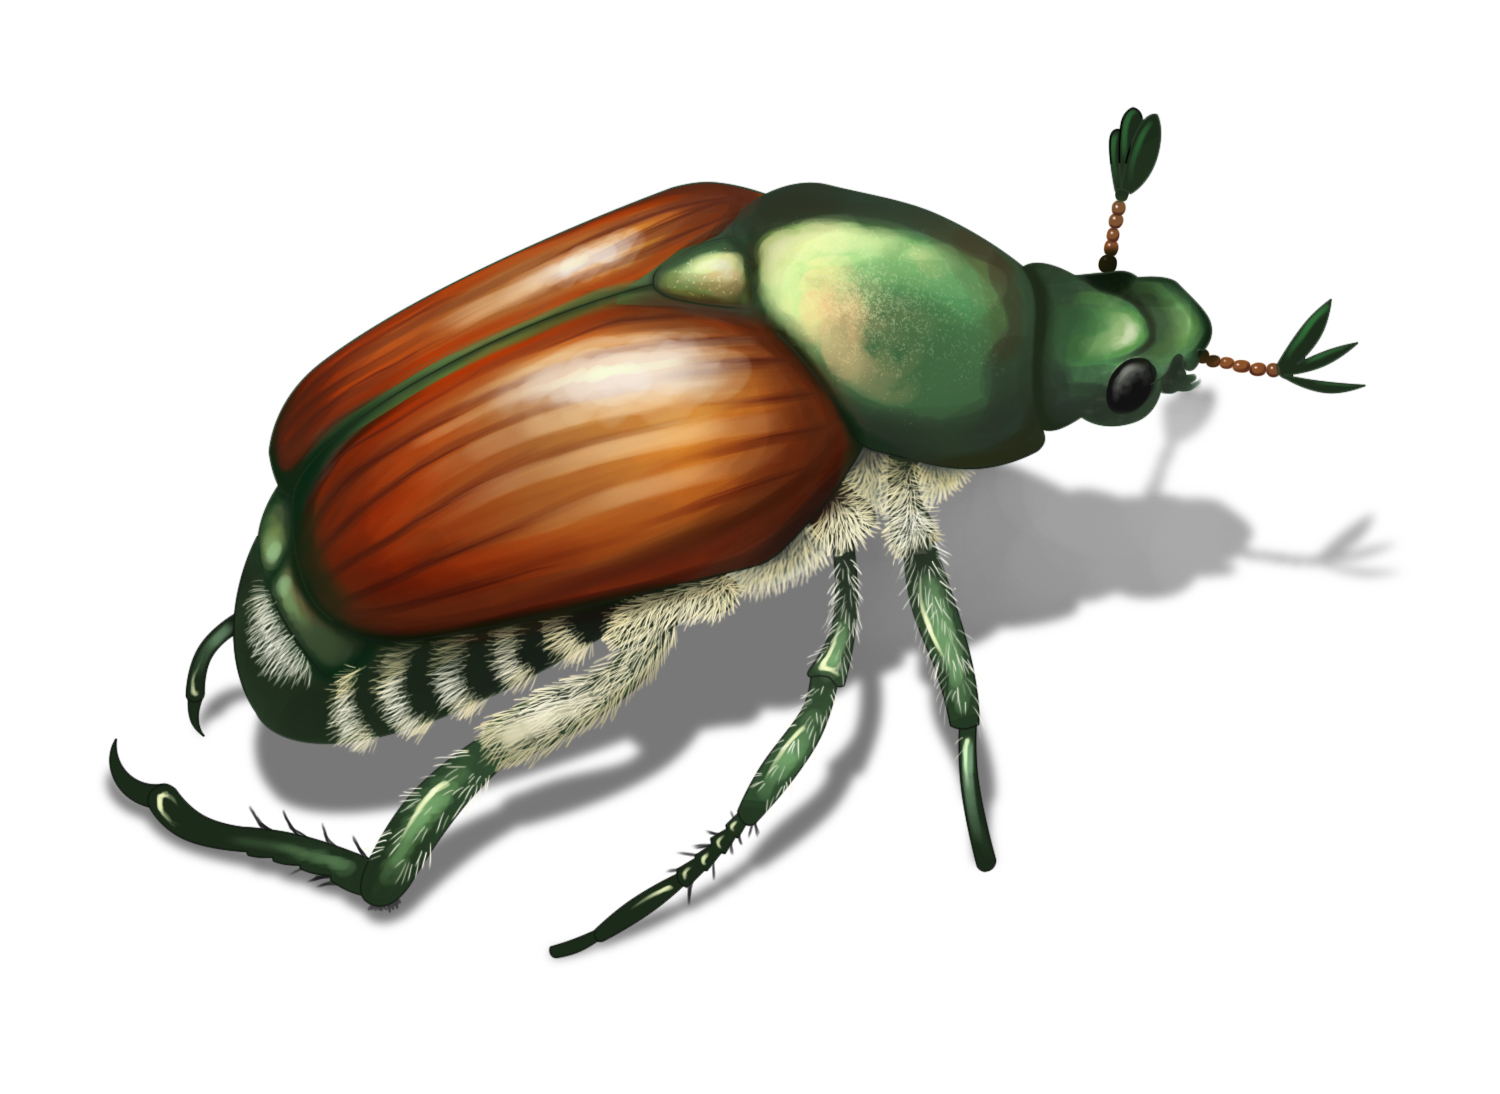 Pictures of beetles images. Beetle clipart japanese beetle